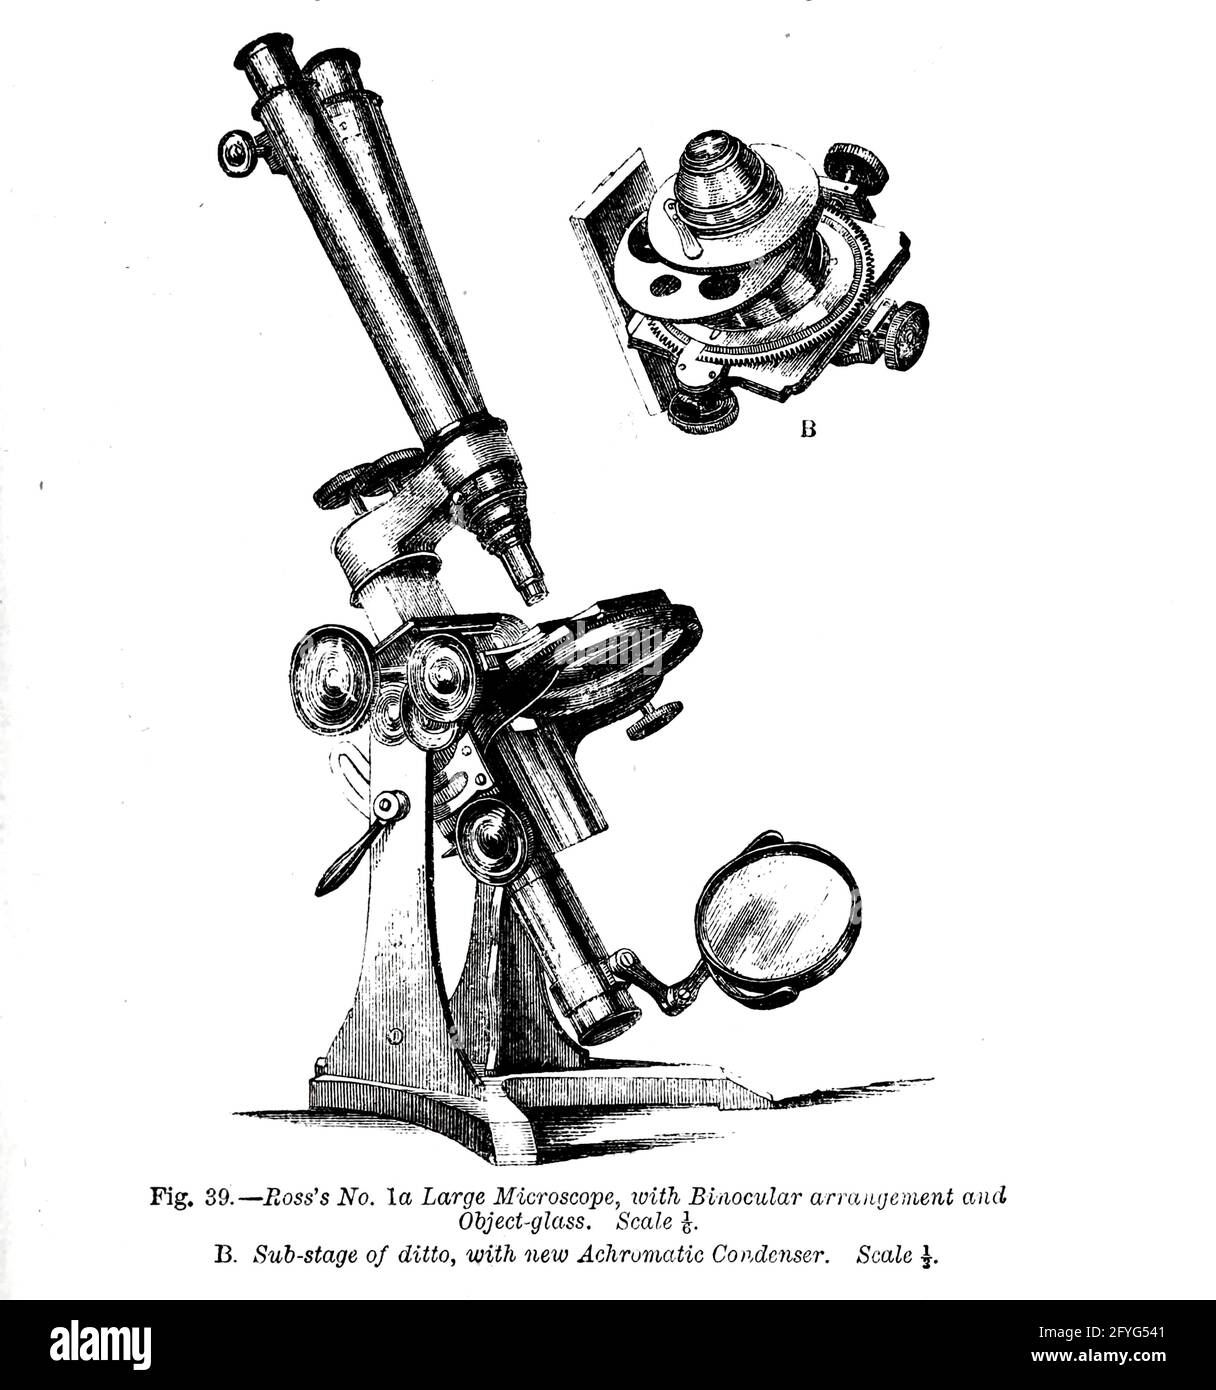 Fig. 39. Ross's No. 1a Large Microscope, with Binocular arrangement and Object-glass. And Sub-stage of ditto, with new Achromatic Condenser. From the book '  The microscope : its history, construction, and application ' by Hogg, Jabez, 1817-1899 Published in London by G. Routledge in 1869 with Illustrations by TUFFEN WEST Stock Photo